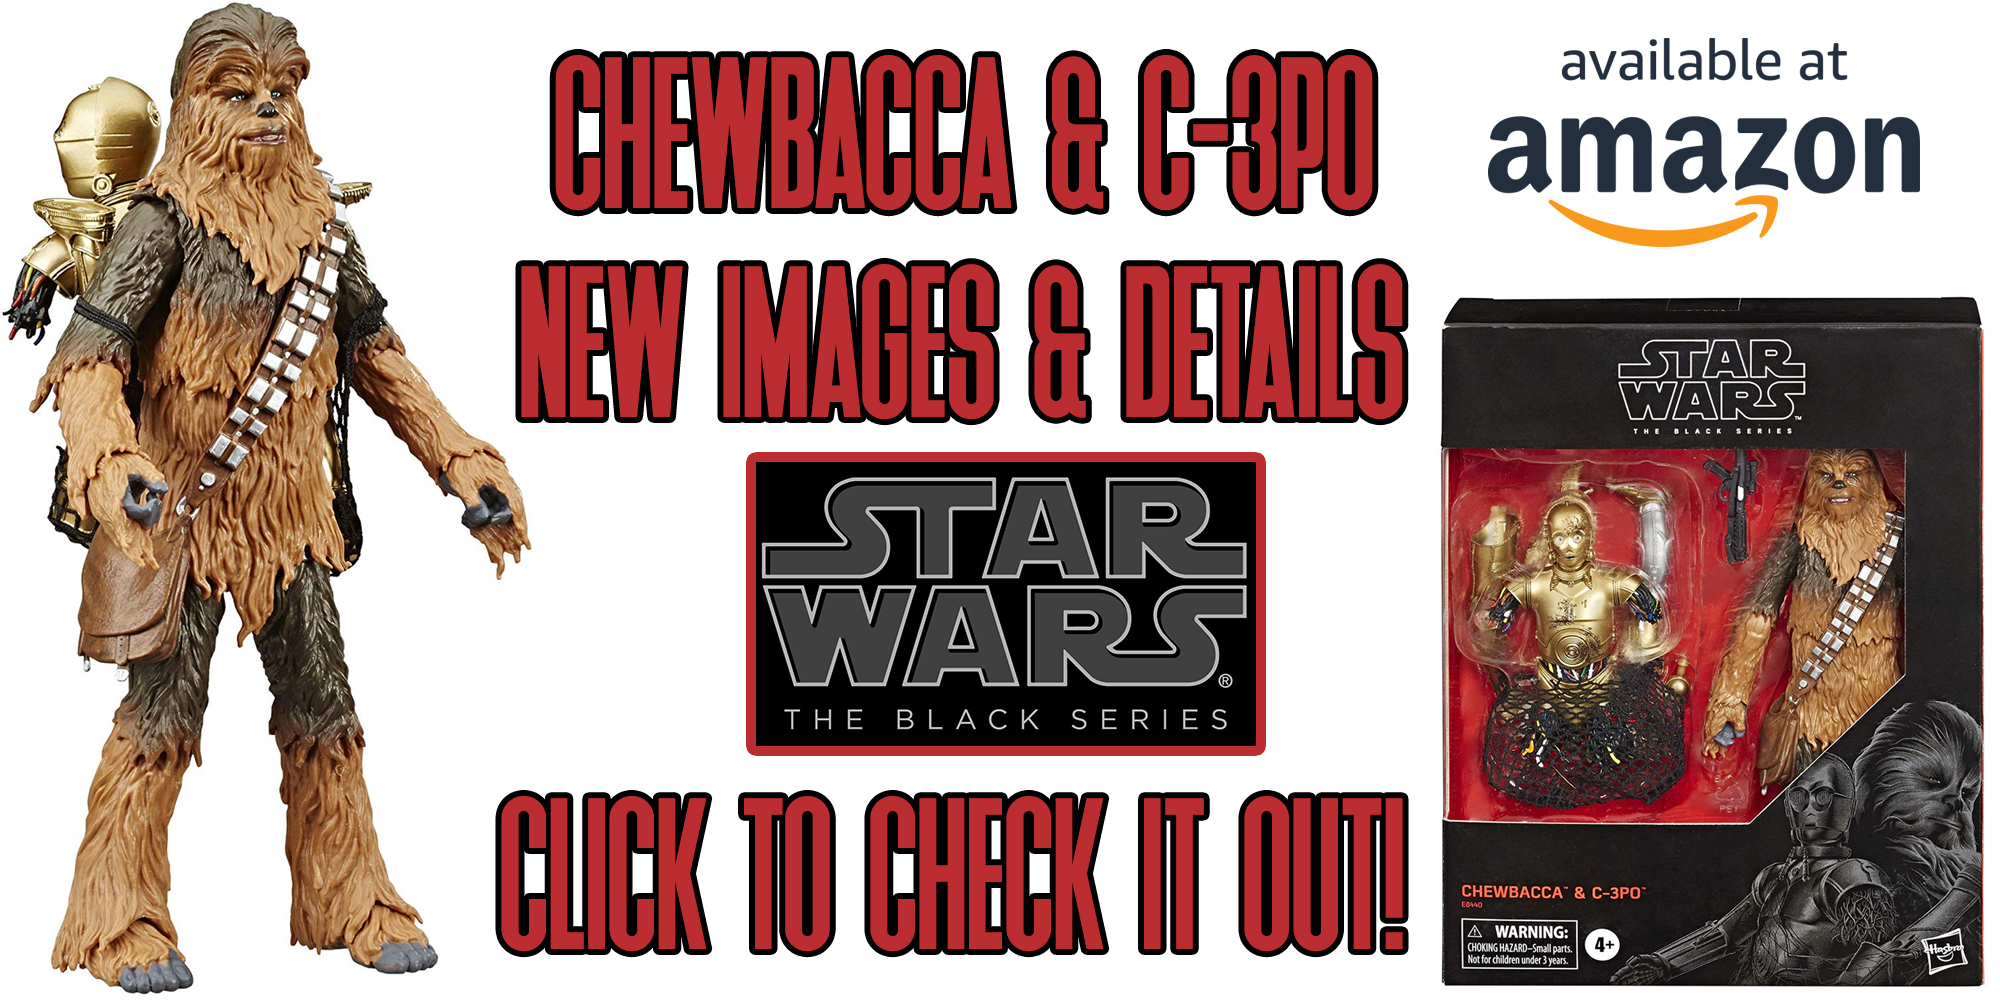 New Images And Details About The Amazon Exclusive Chewbacca And C-3PO Figures